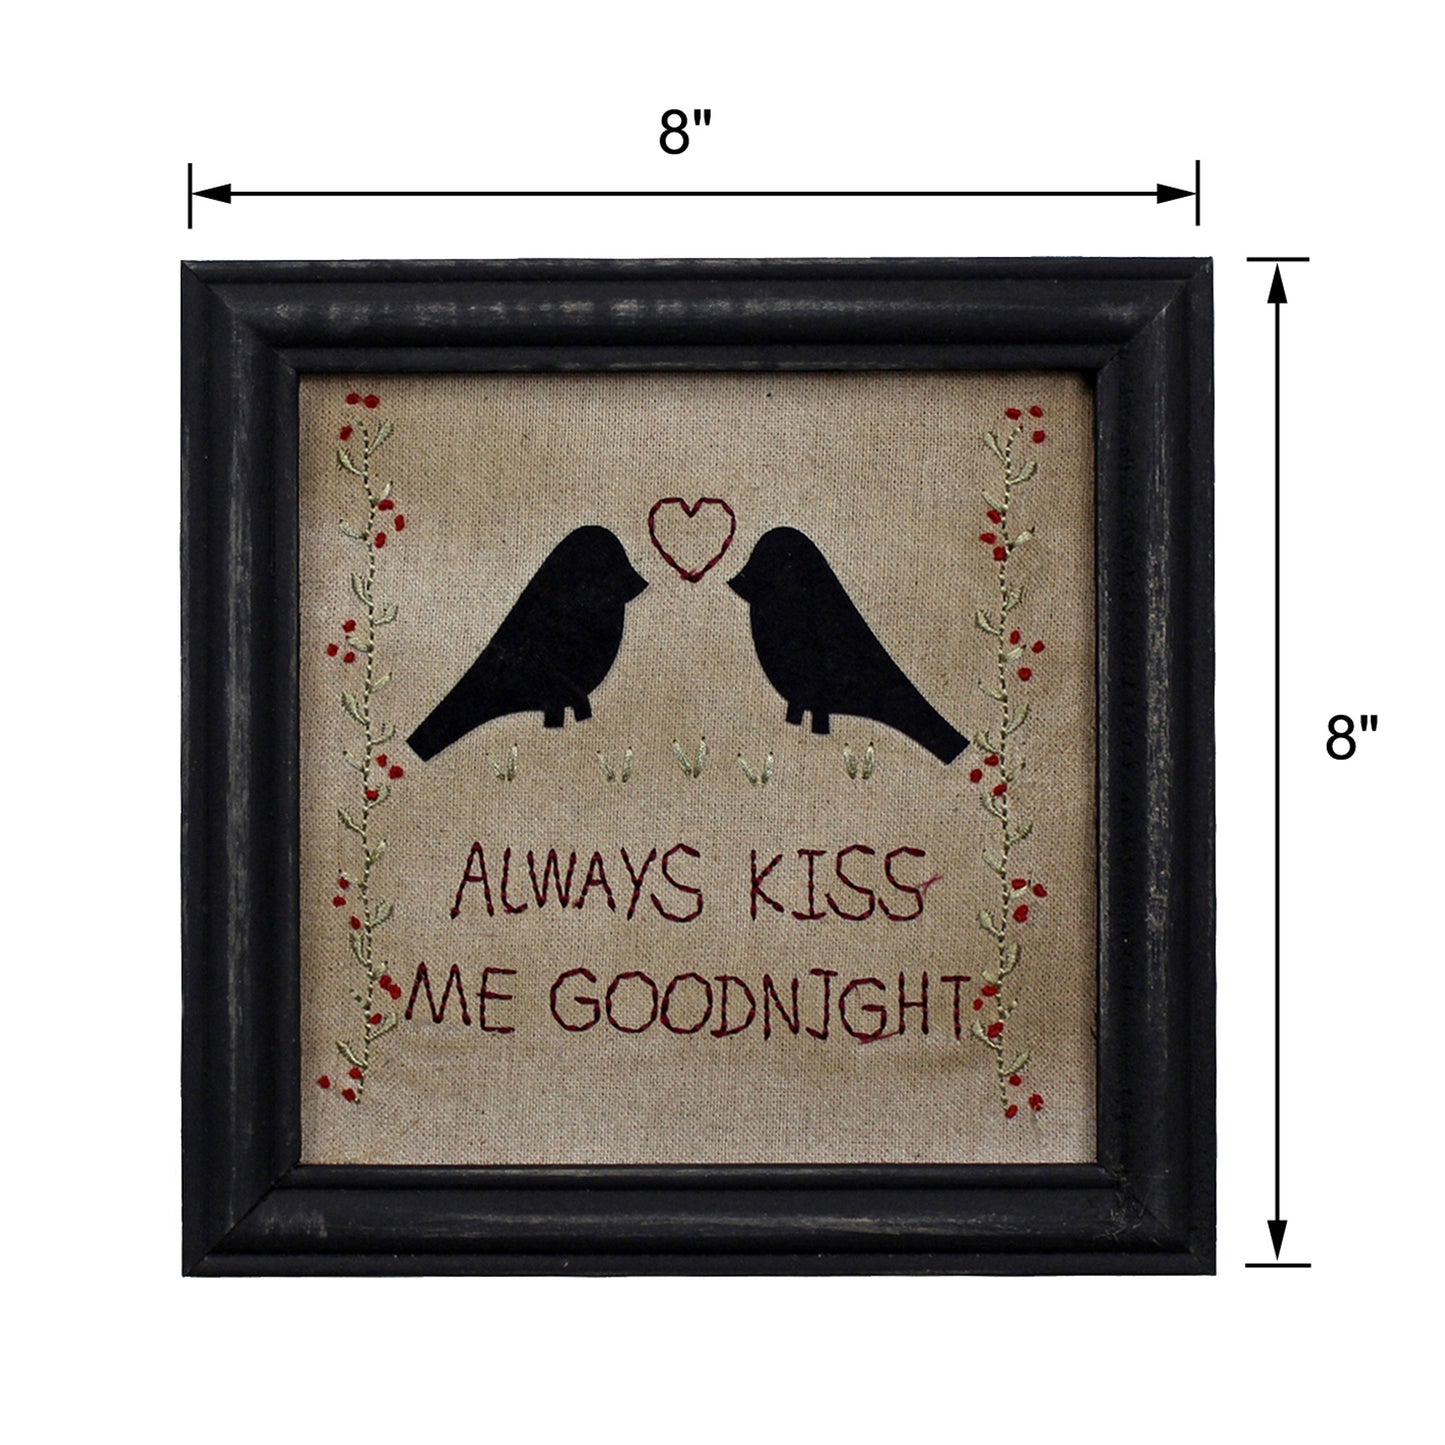 CVHOMEDECO. Primitives Antique Always Kiss Me Goodnight Stitchery Frame Wall Mounted Hanging Decor Art, 8 x 8 Inch